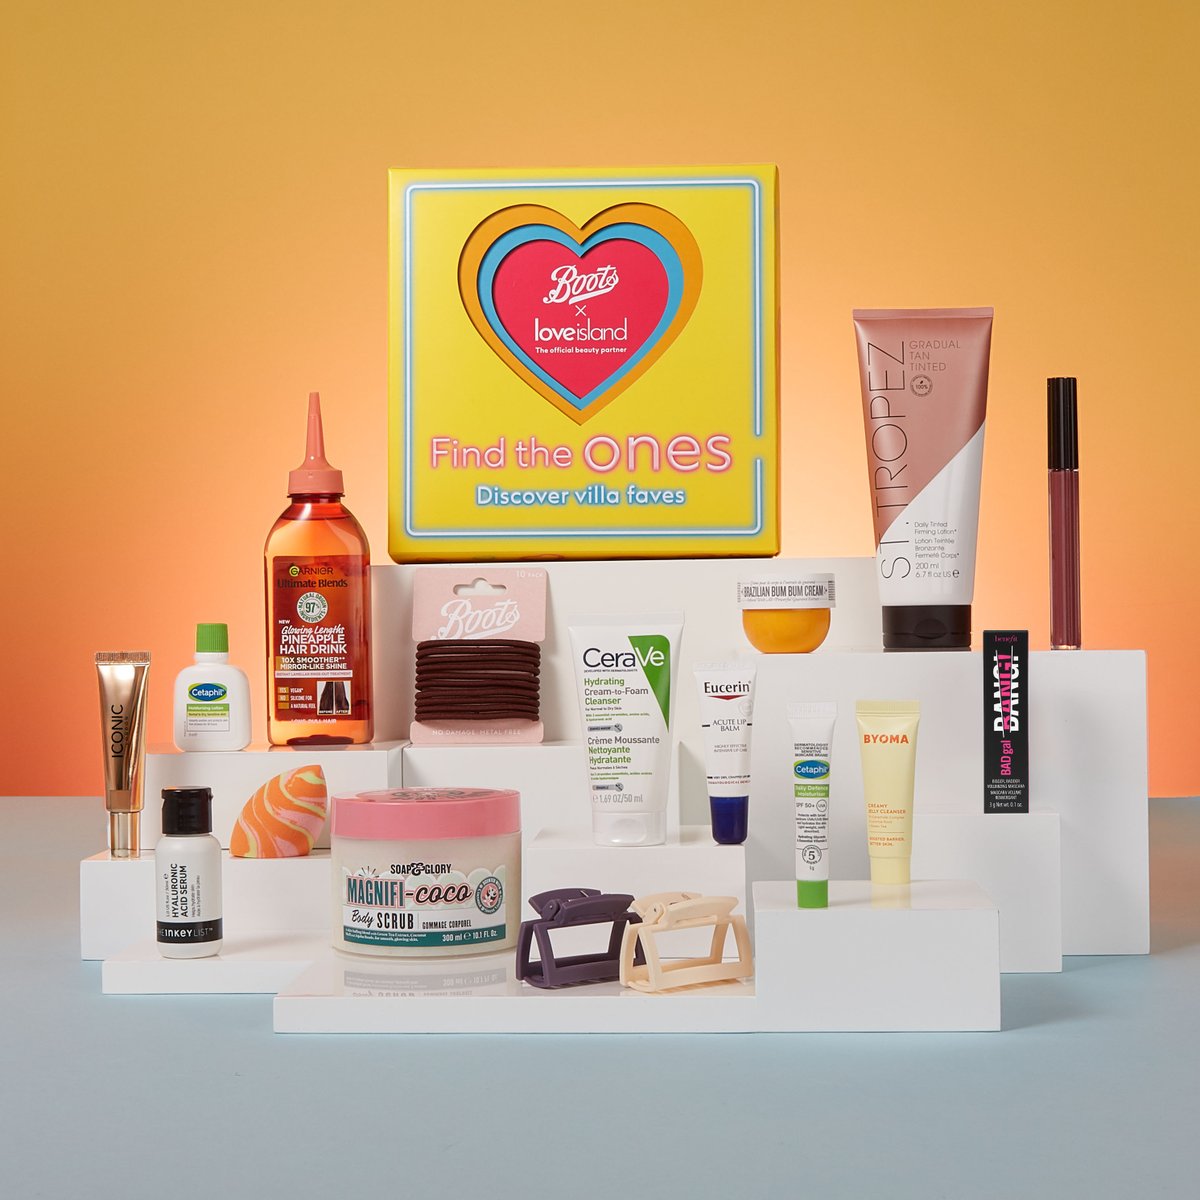 We've got a text! The Boots x Love Island Beauty Box has landed 🤩 Filled with our ultimate beauty products, it will make your head turn 👀 Shop £132 worth of product for only £45, here: spr.ly/6007VTaSV 

#BootsUK #BootsxLoveIsland #FindTheOnes